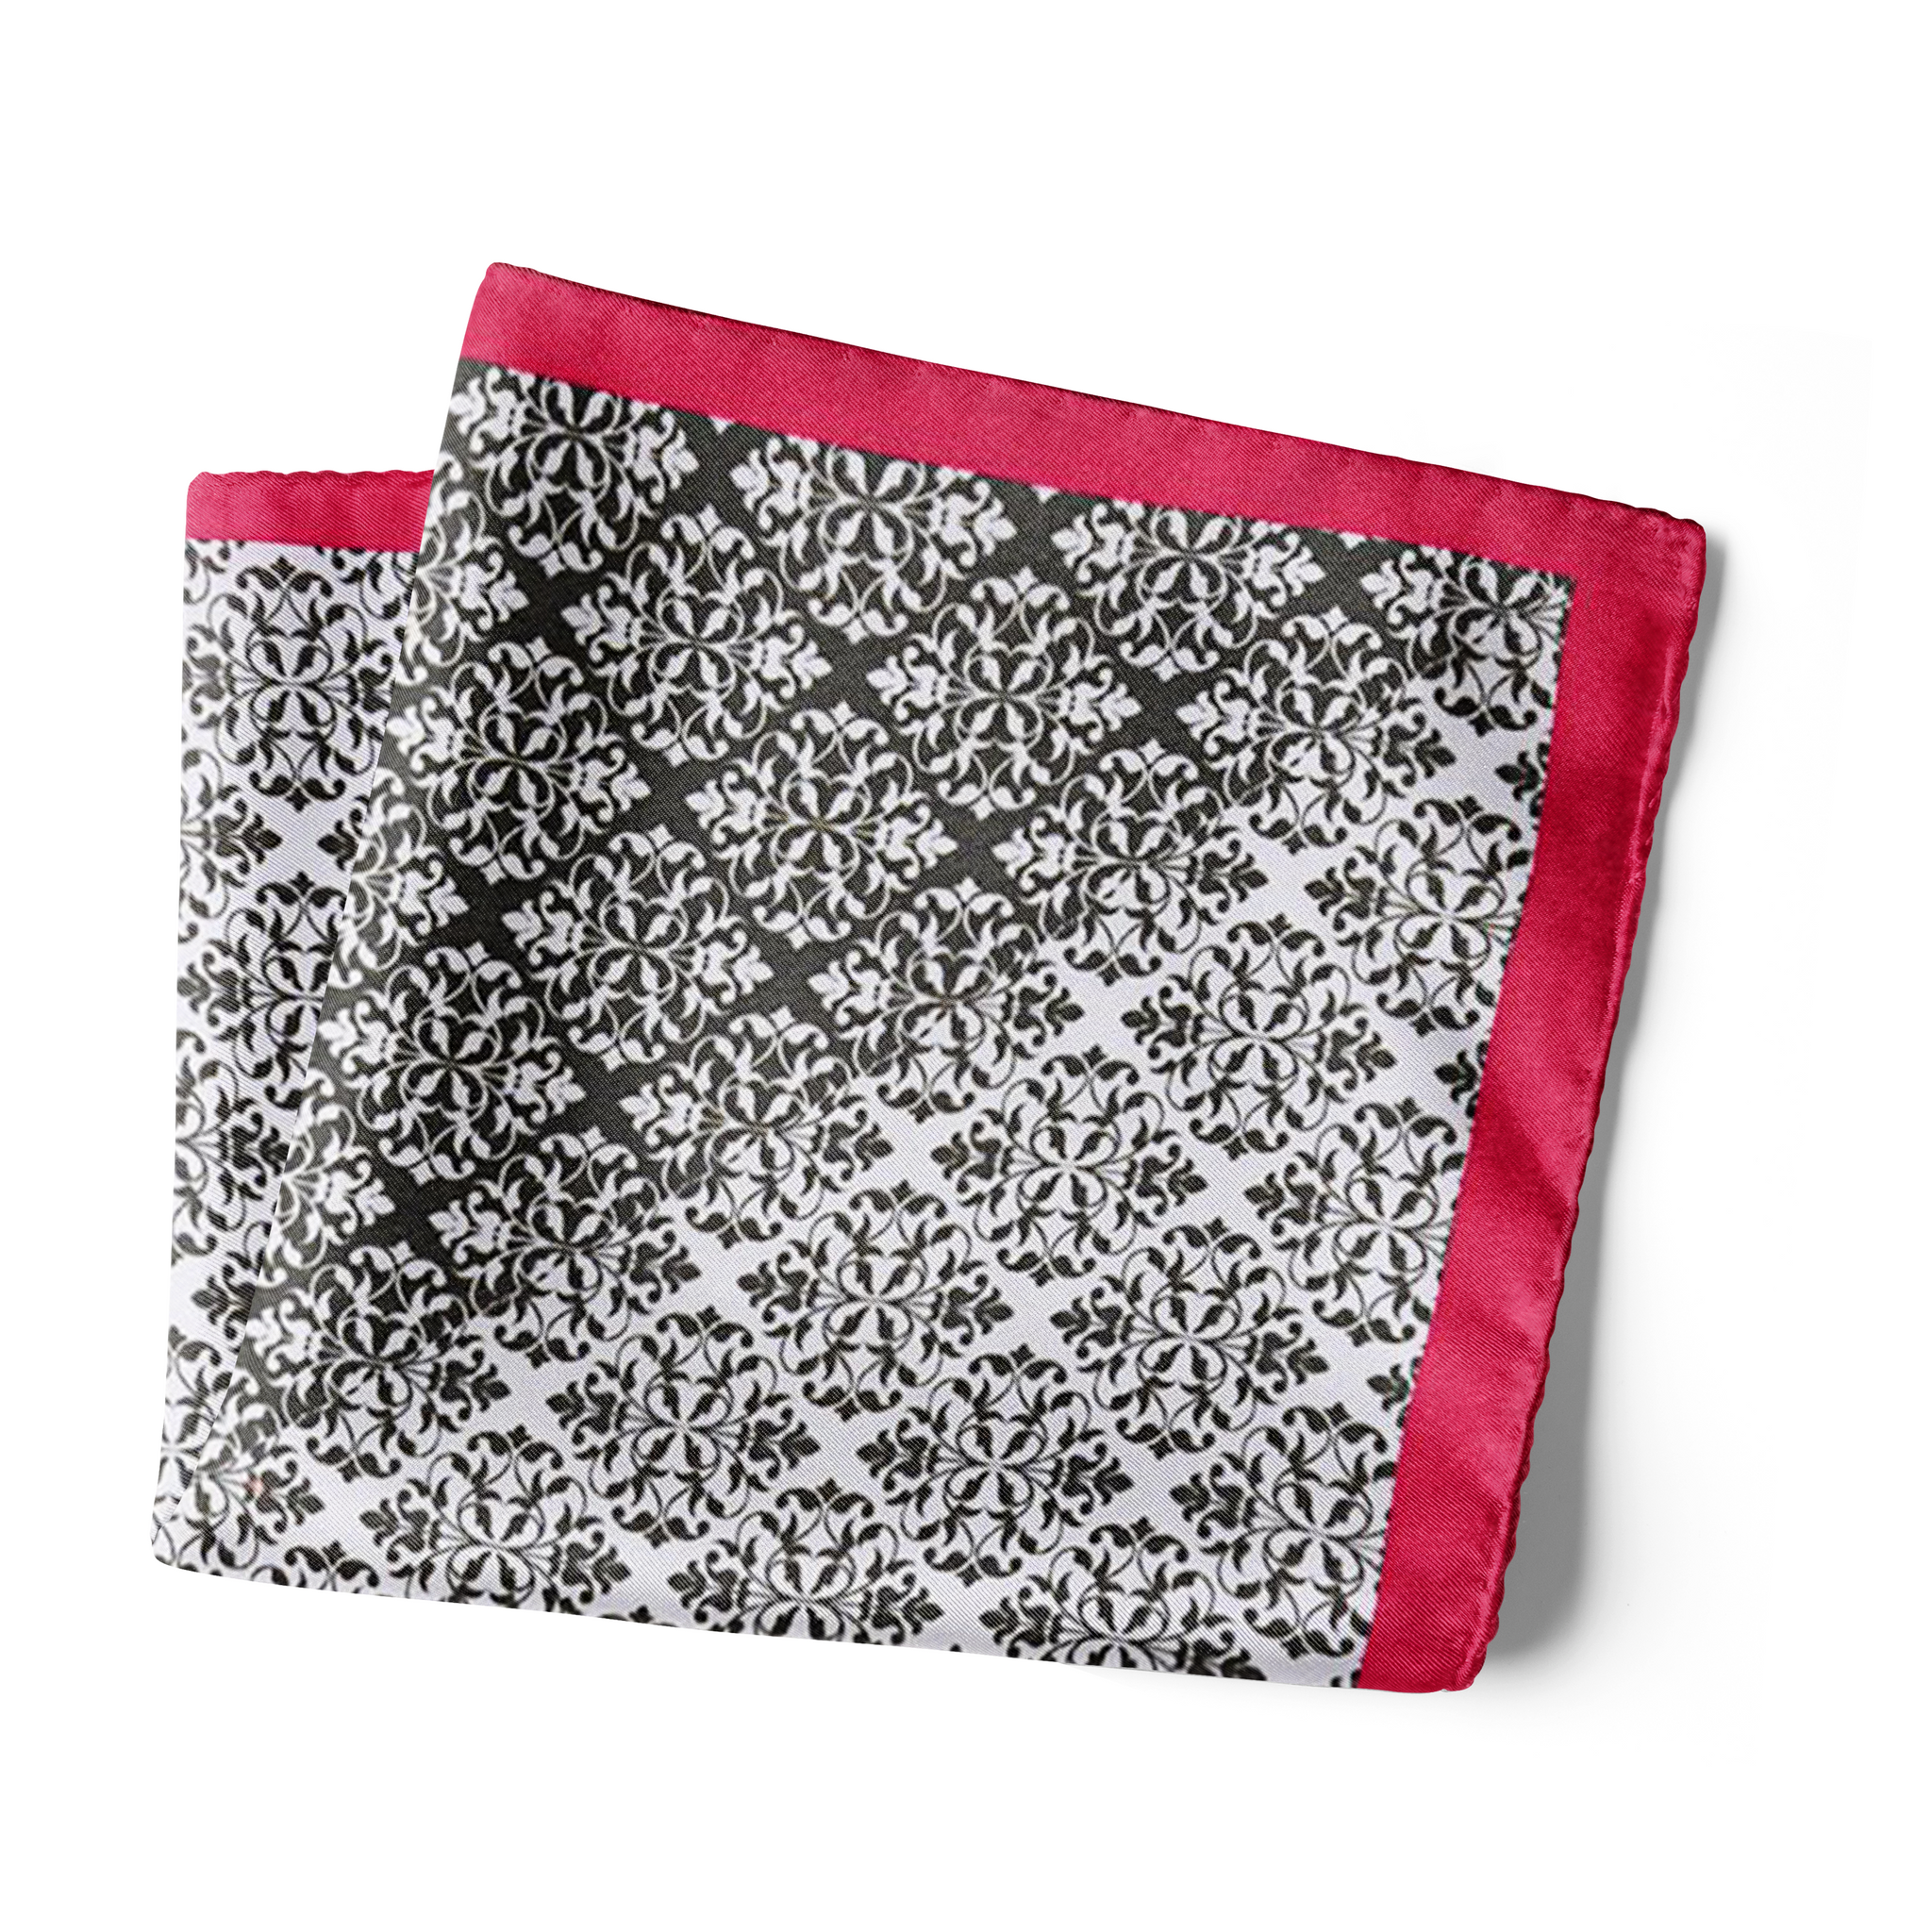 Chokore White & Black Silk Pocket Square from Indian at Heart collection